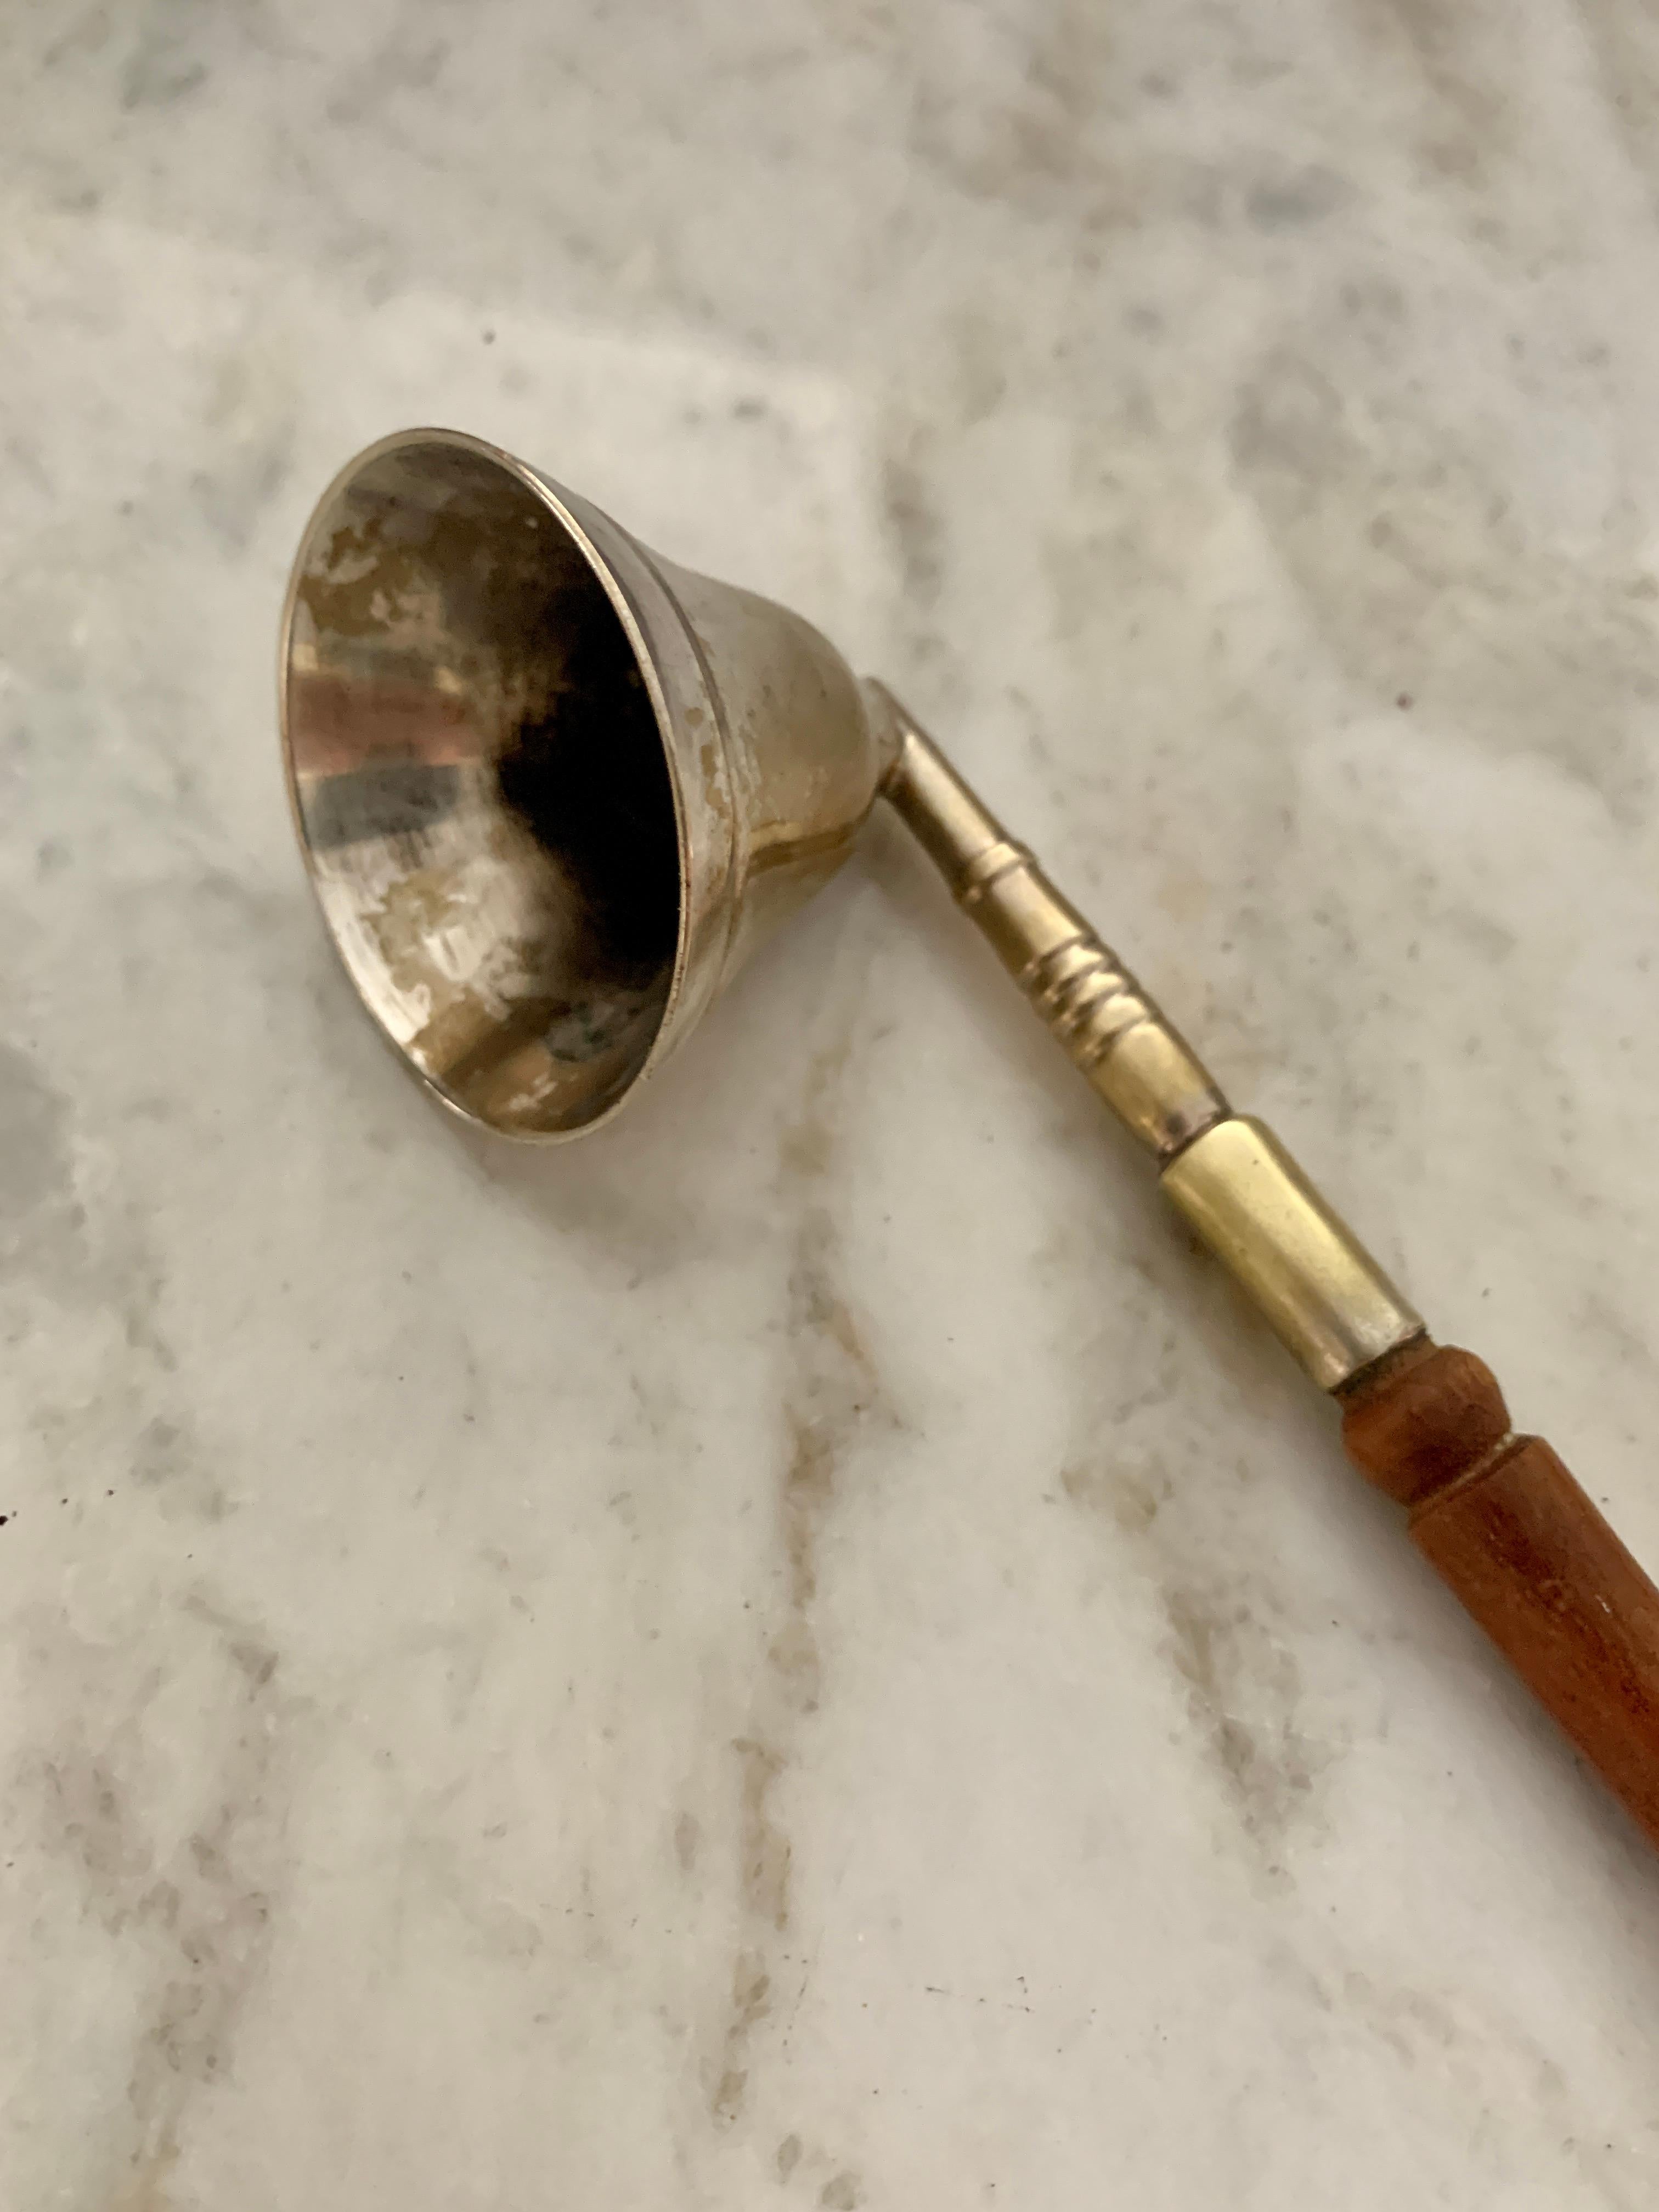 Candle snuffer of carved wood handle and brass housing to put out a flame. The handle is long and carved. The tip has a piece missing, however, rather than cut it off, we left it as it adds character and is not terribly noticeable. A very nice